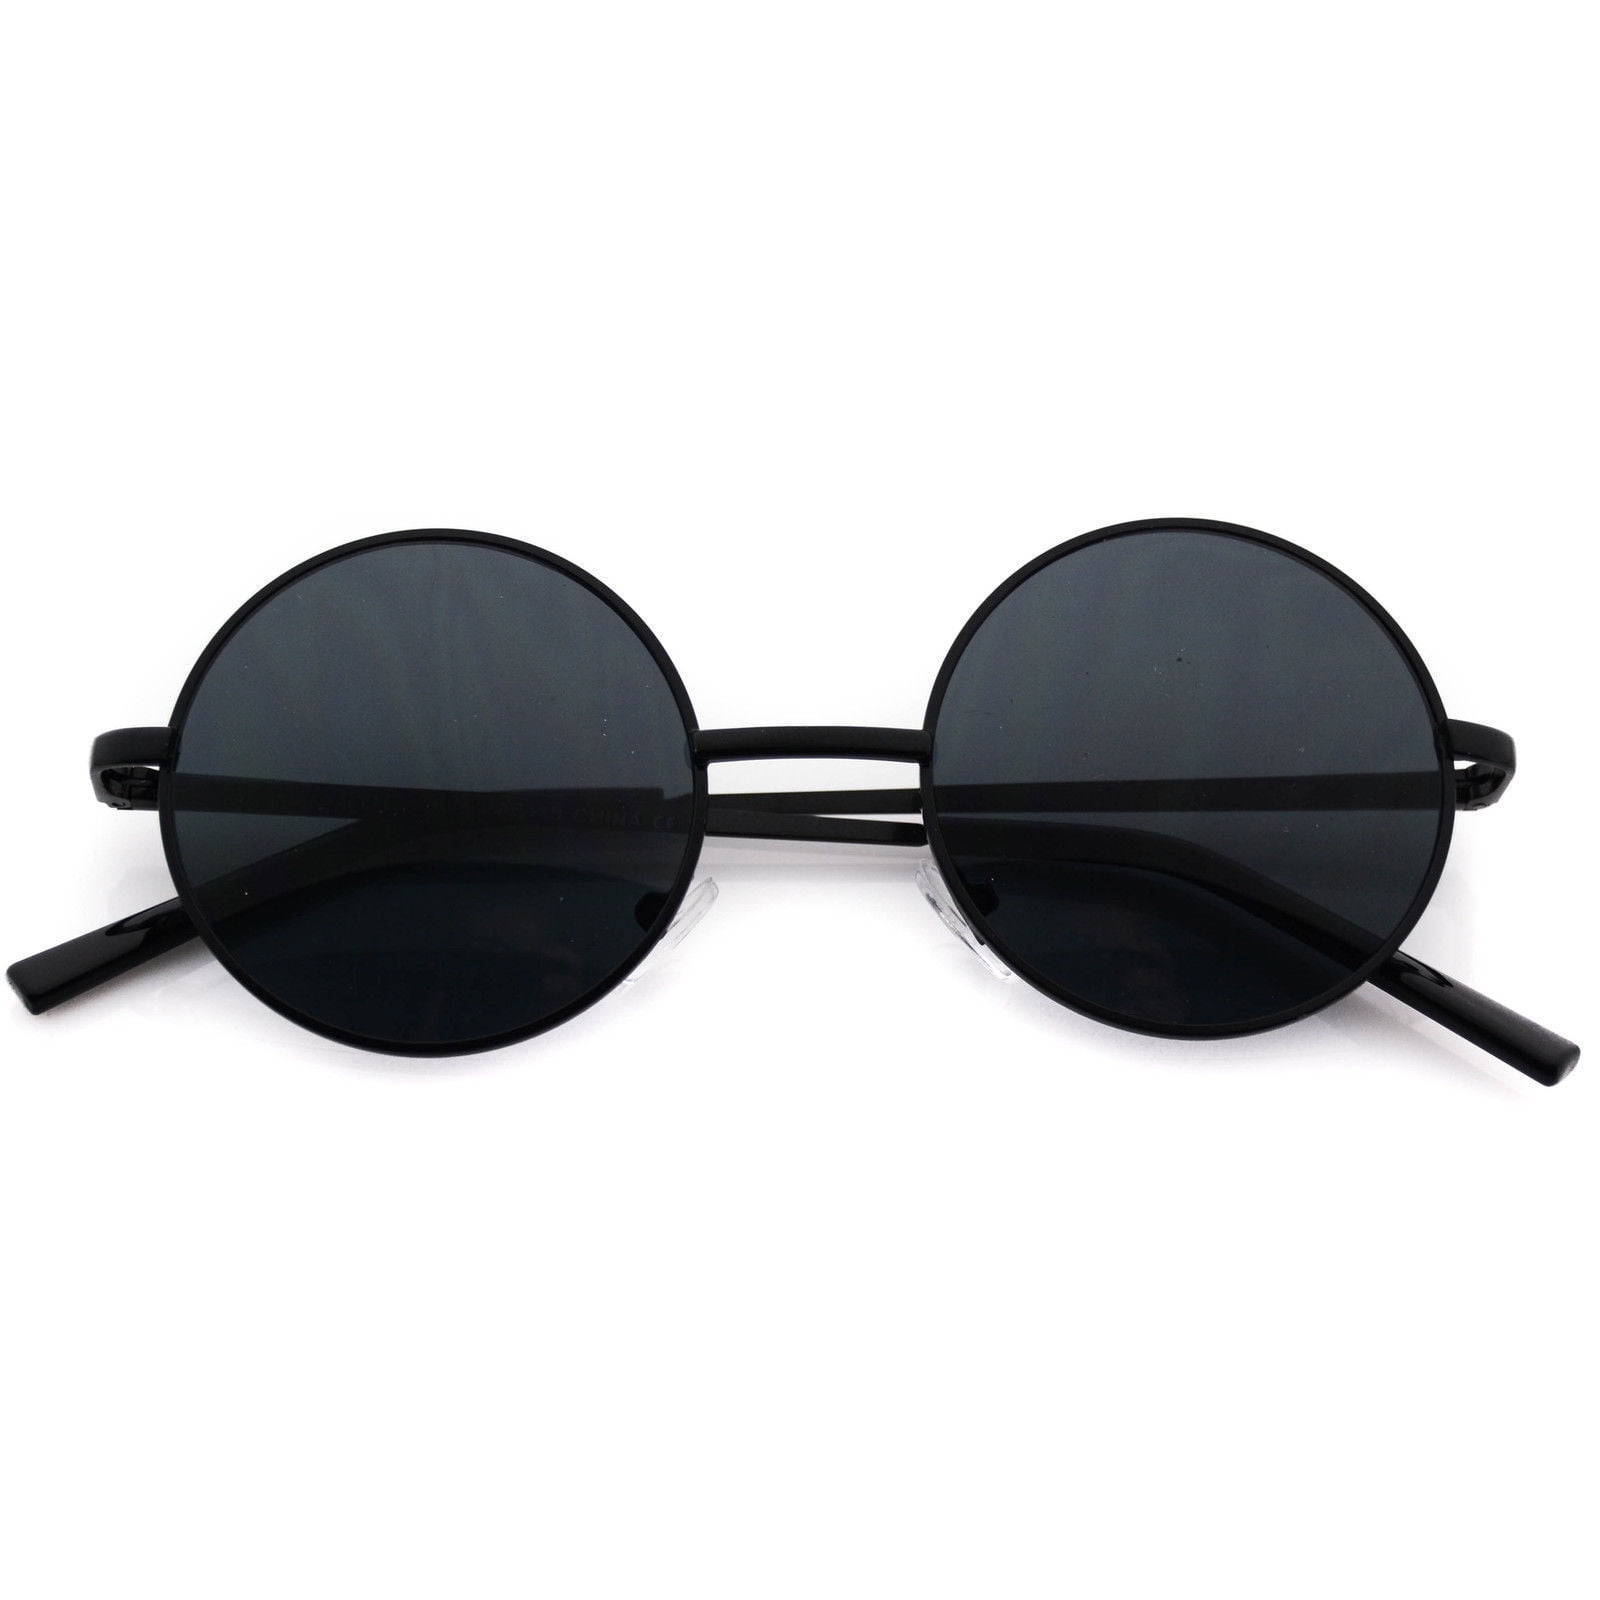 Buy JUST-STYLE Square Sunglasses (Matte Black Frame, Black Lens) at  Amazon.in